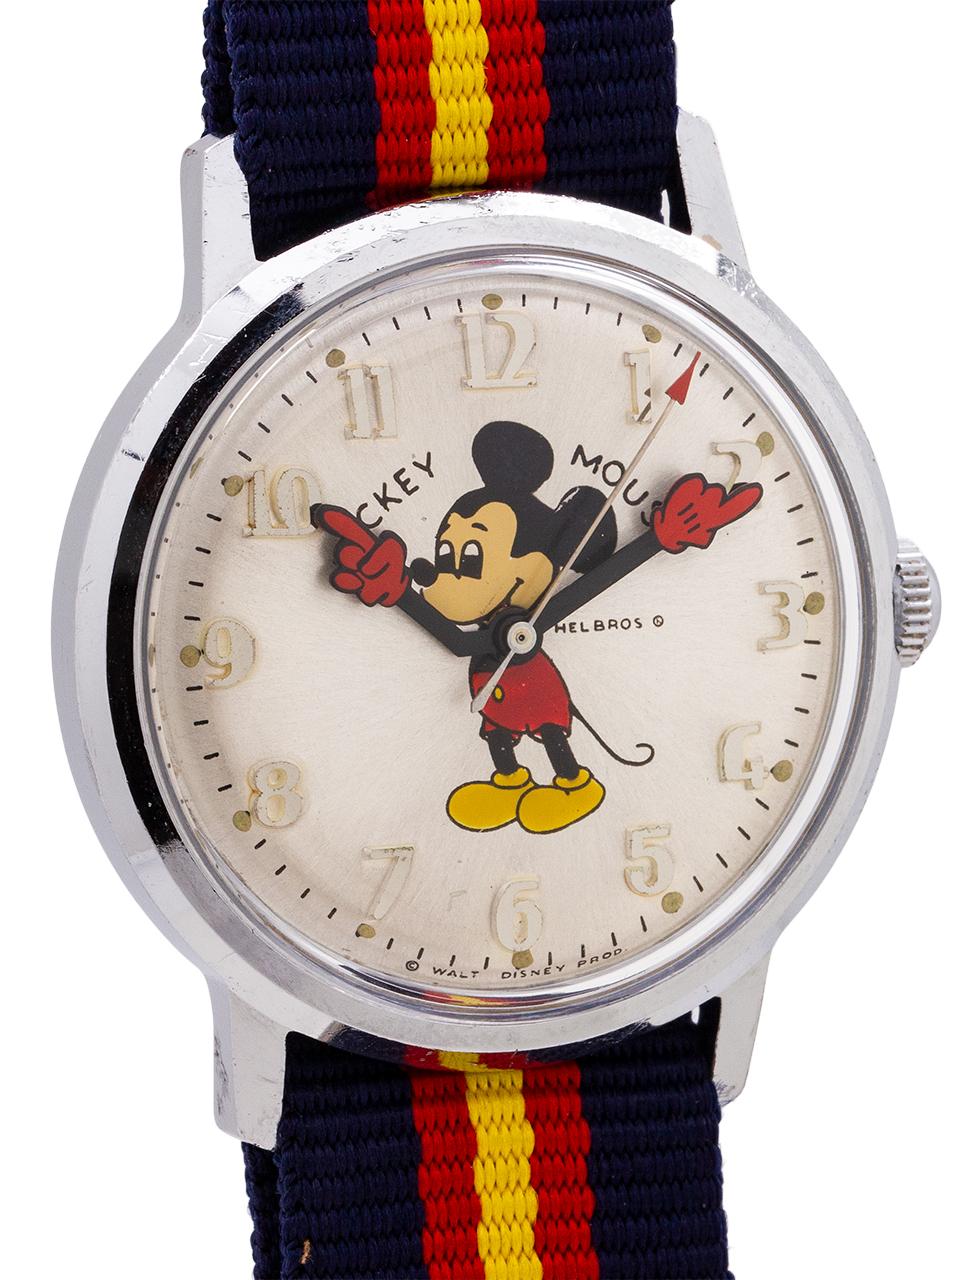 
Vintage Helbros 17 jewel manual wind Mickey Mouse watch circa 1970’s. Featuring 34mm diameter base metal case with steel screw down stainless steel back, with acrylic crystal, and with excellent condition original dial with polychrome depiction of